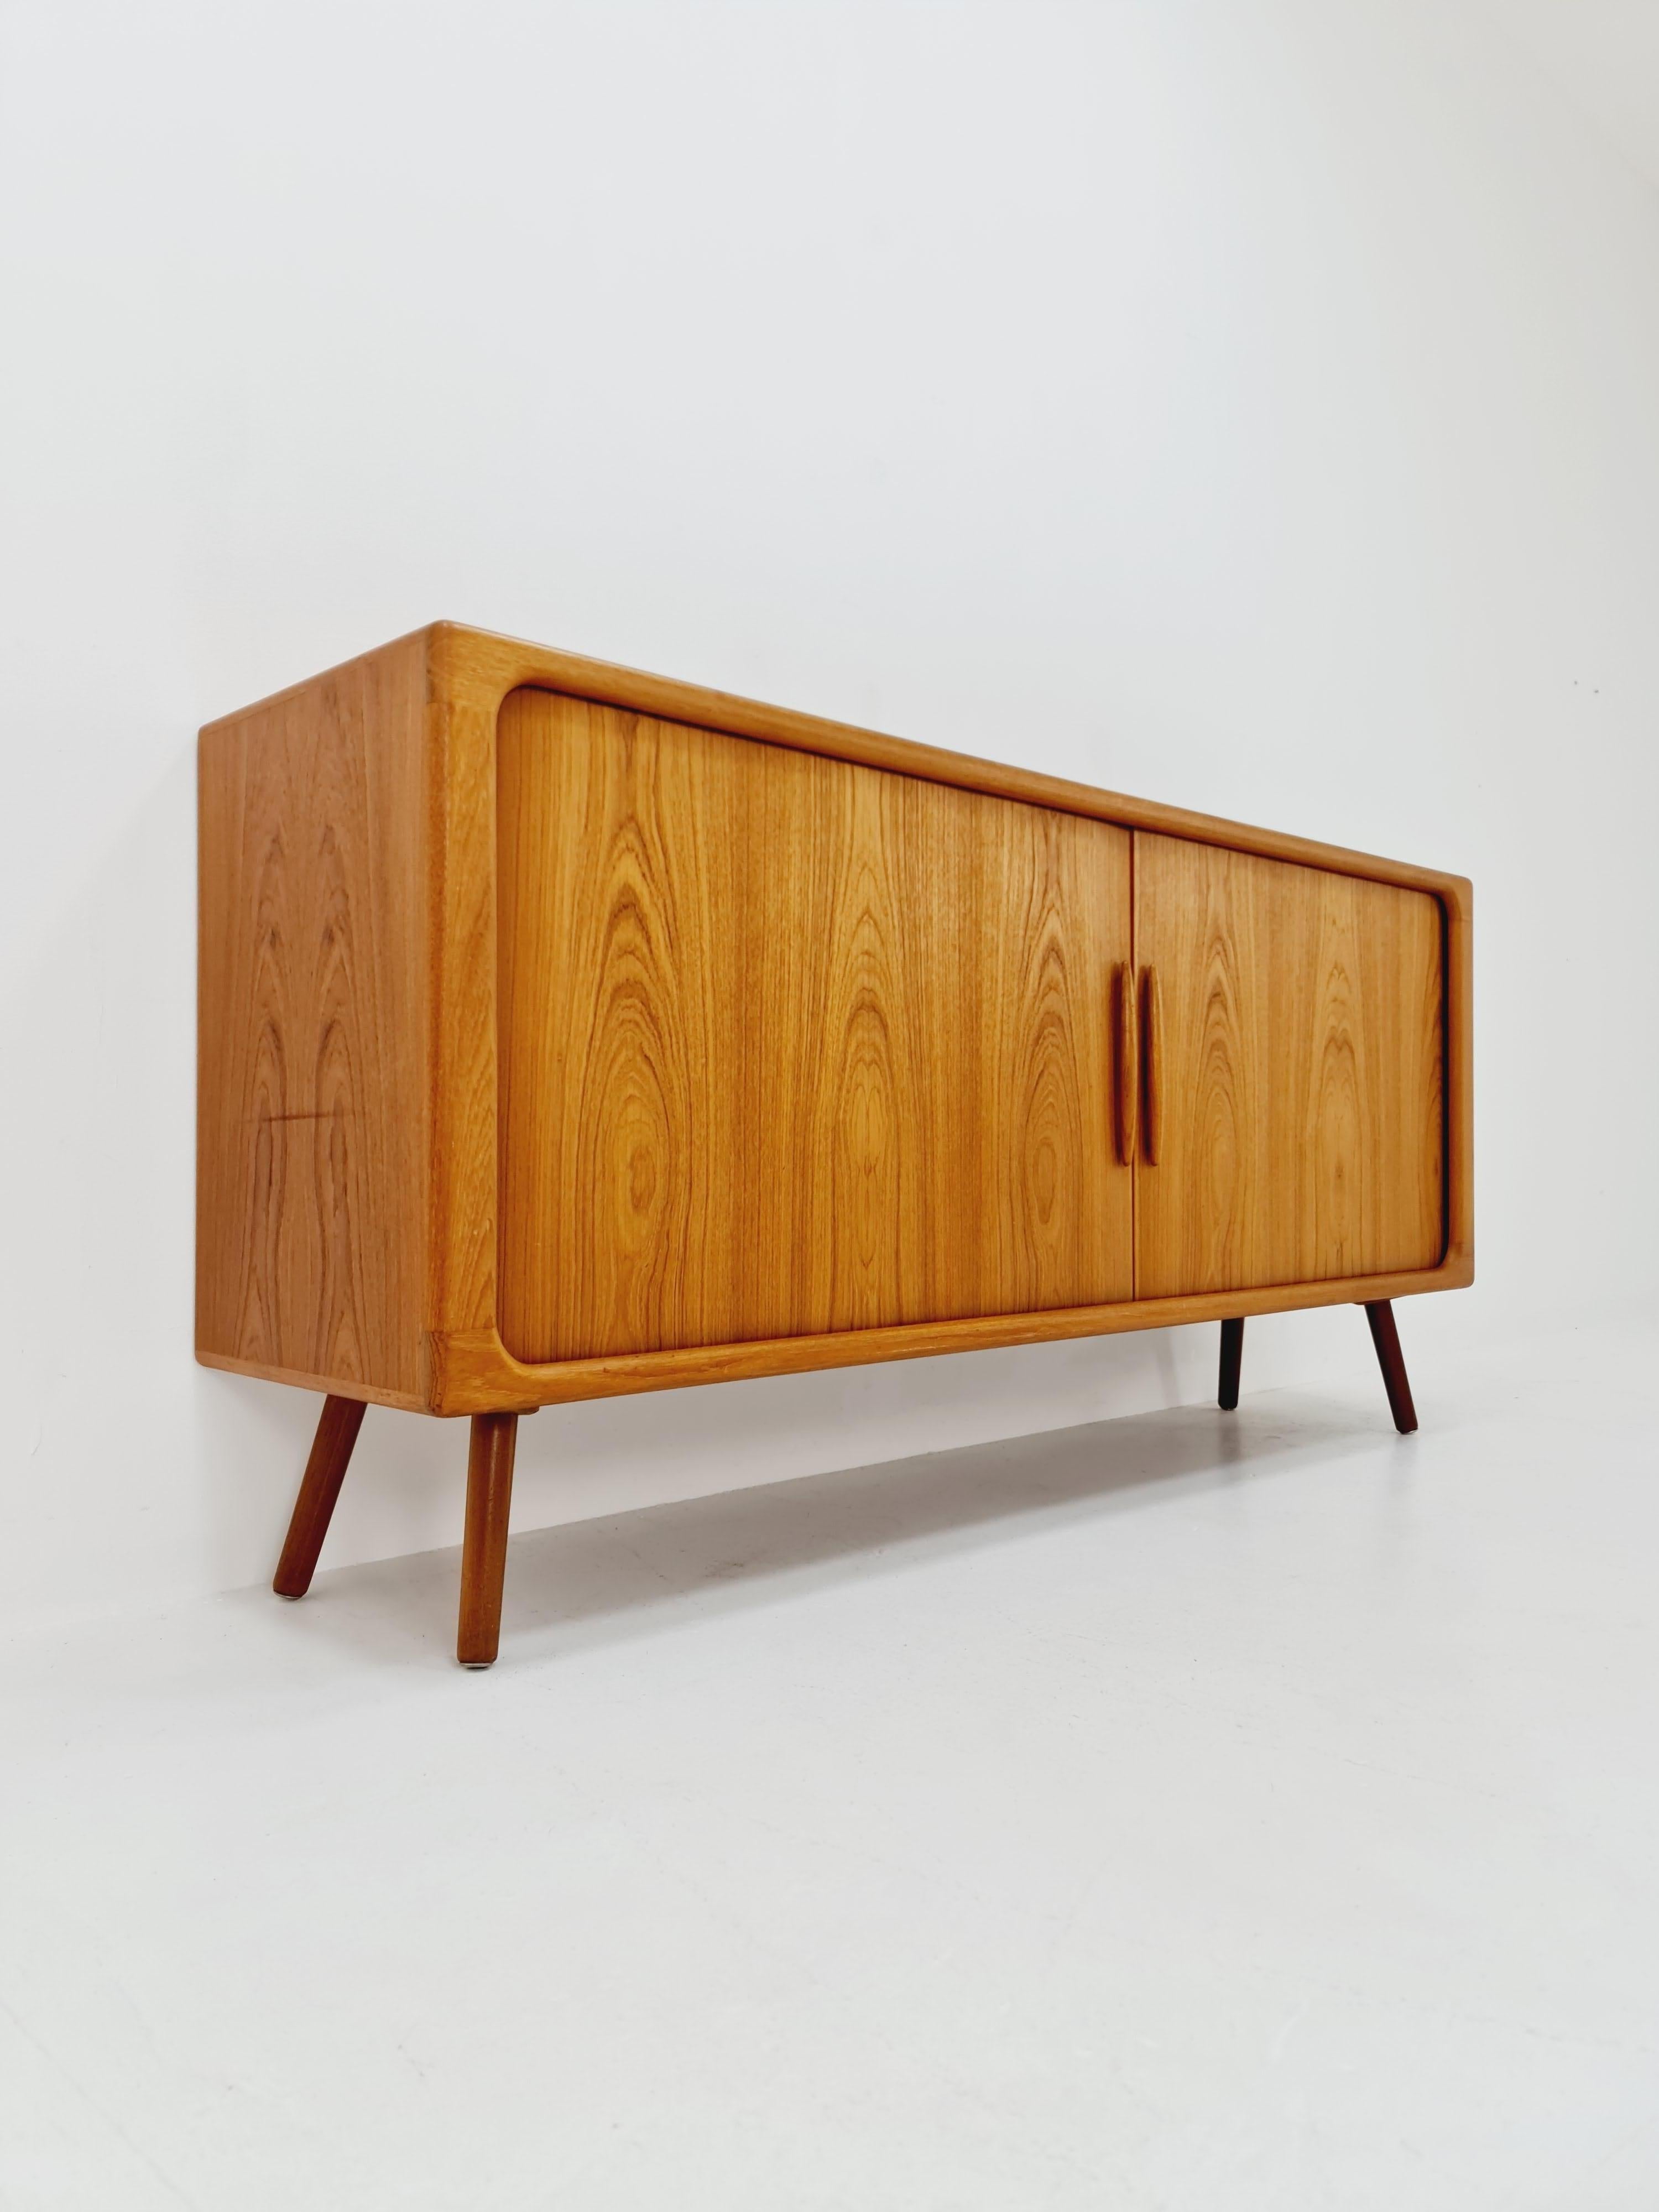 Midcentury Danish Teak Sideboard by Dyrlund , 1960s

Danish Design

Dimensions: 
48   D x 190  W x 91  H cm

It is in good vintage condition, however, as with all vintage items some minor wear marks should be expected.

Please inquiry for prices to